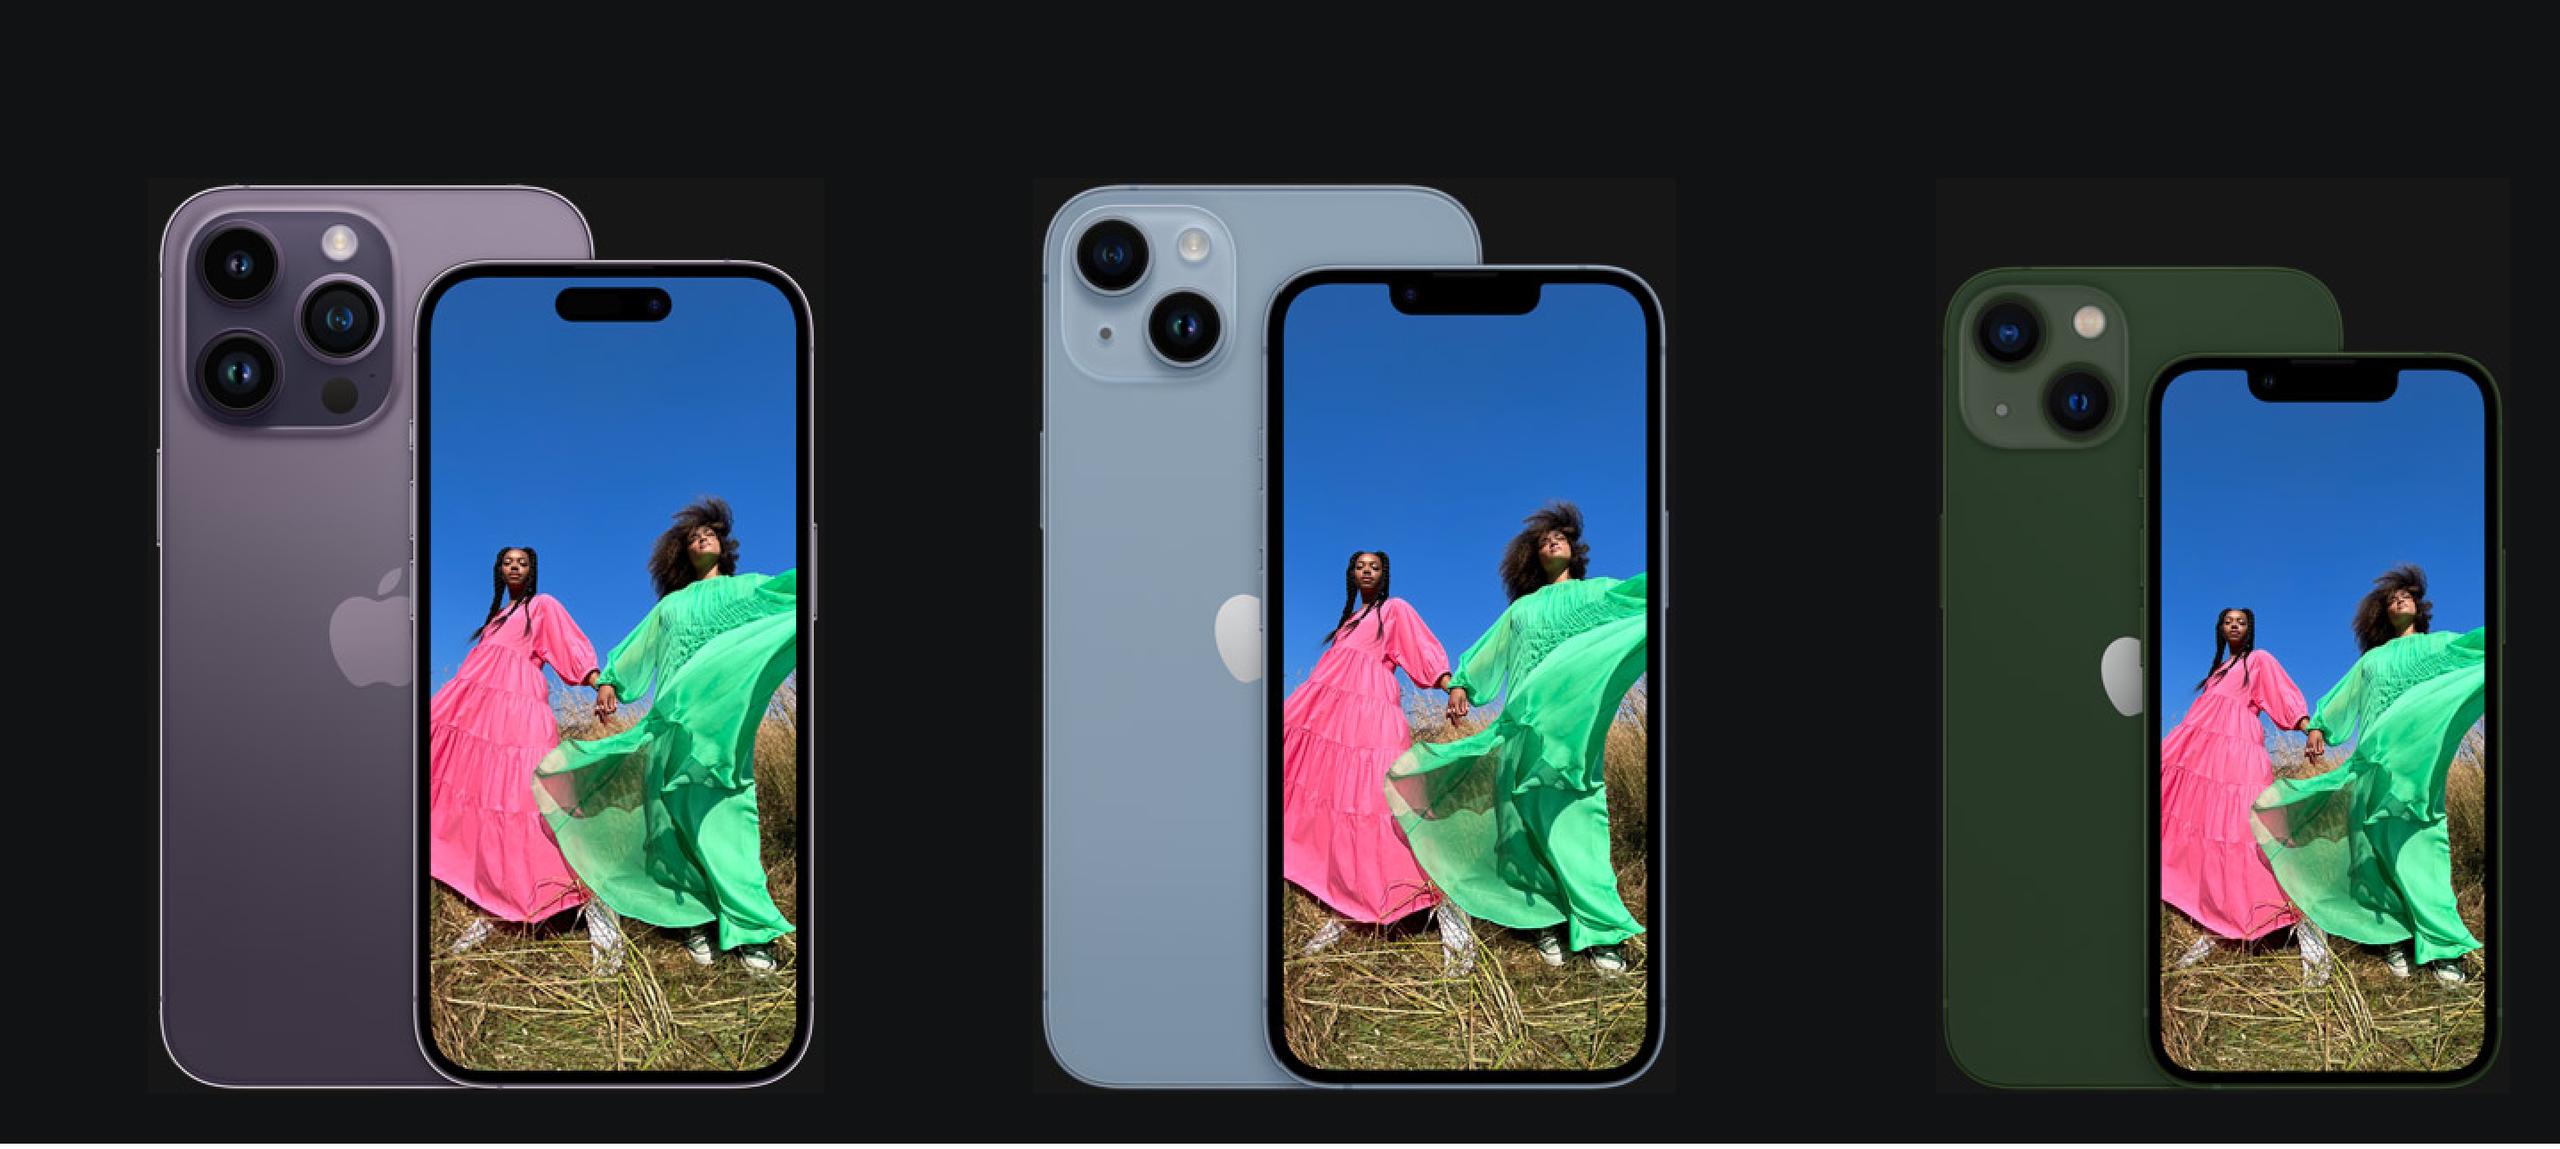 The base iPhone 15 has the best colors for an iPhone in a long